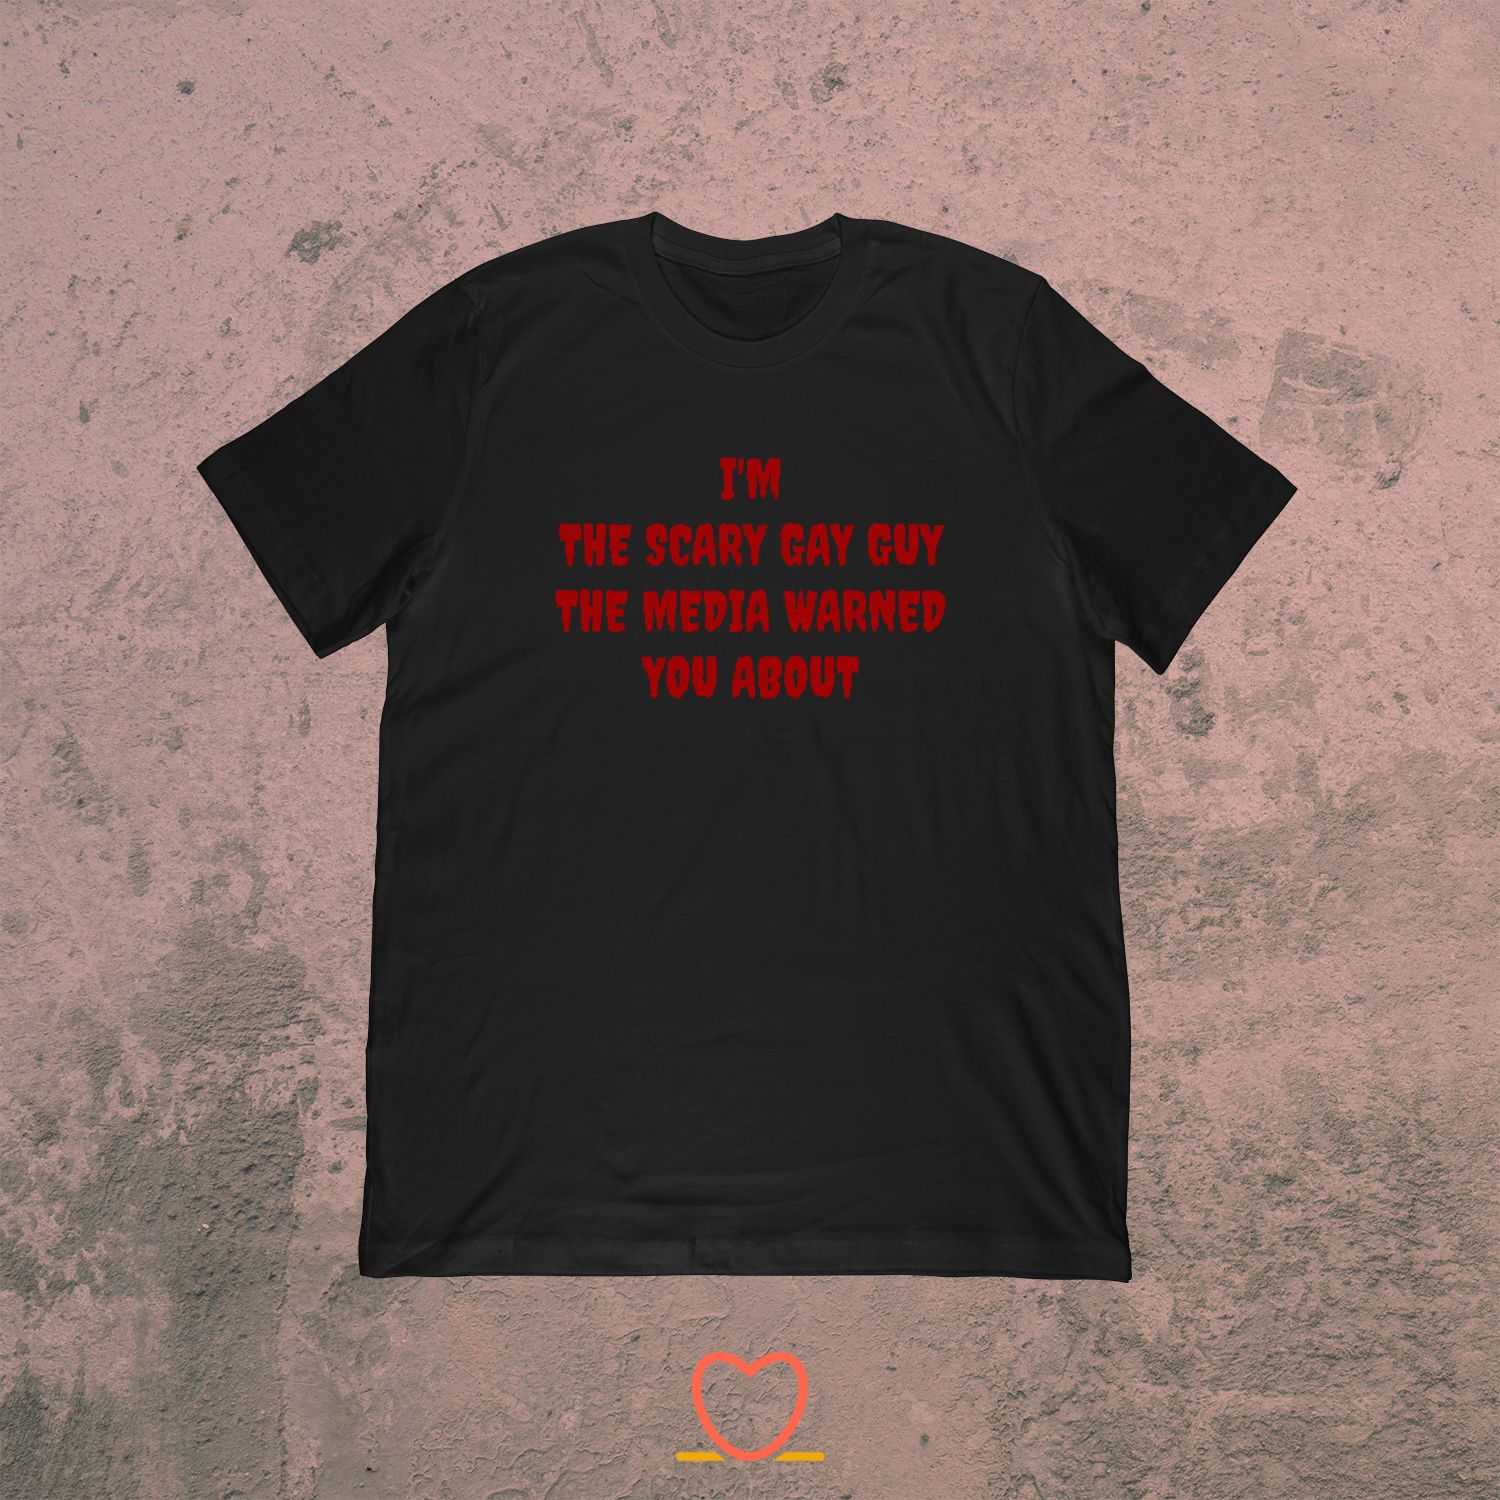 The Scary Gay Guy Media Warned You About – Funny Gay Horror Tee